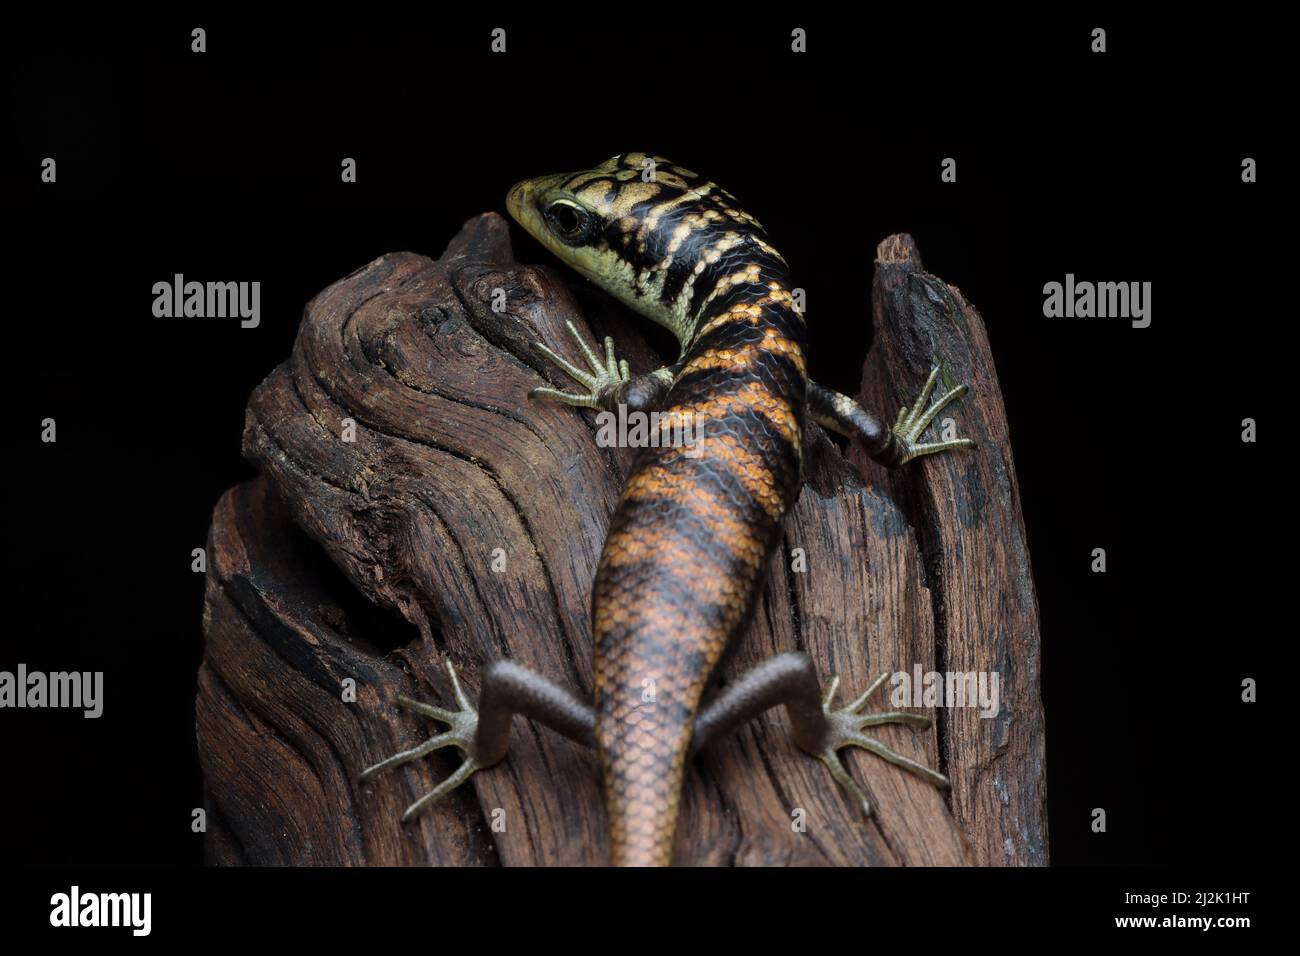 Close-up of a juvenile Olive tree skink (dasia olivacea) on wood, Indonesia Stock Photo